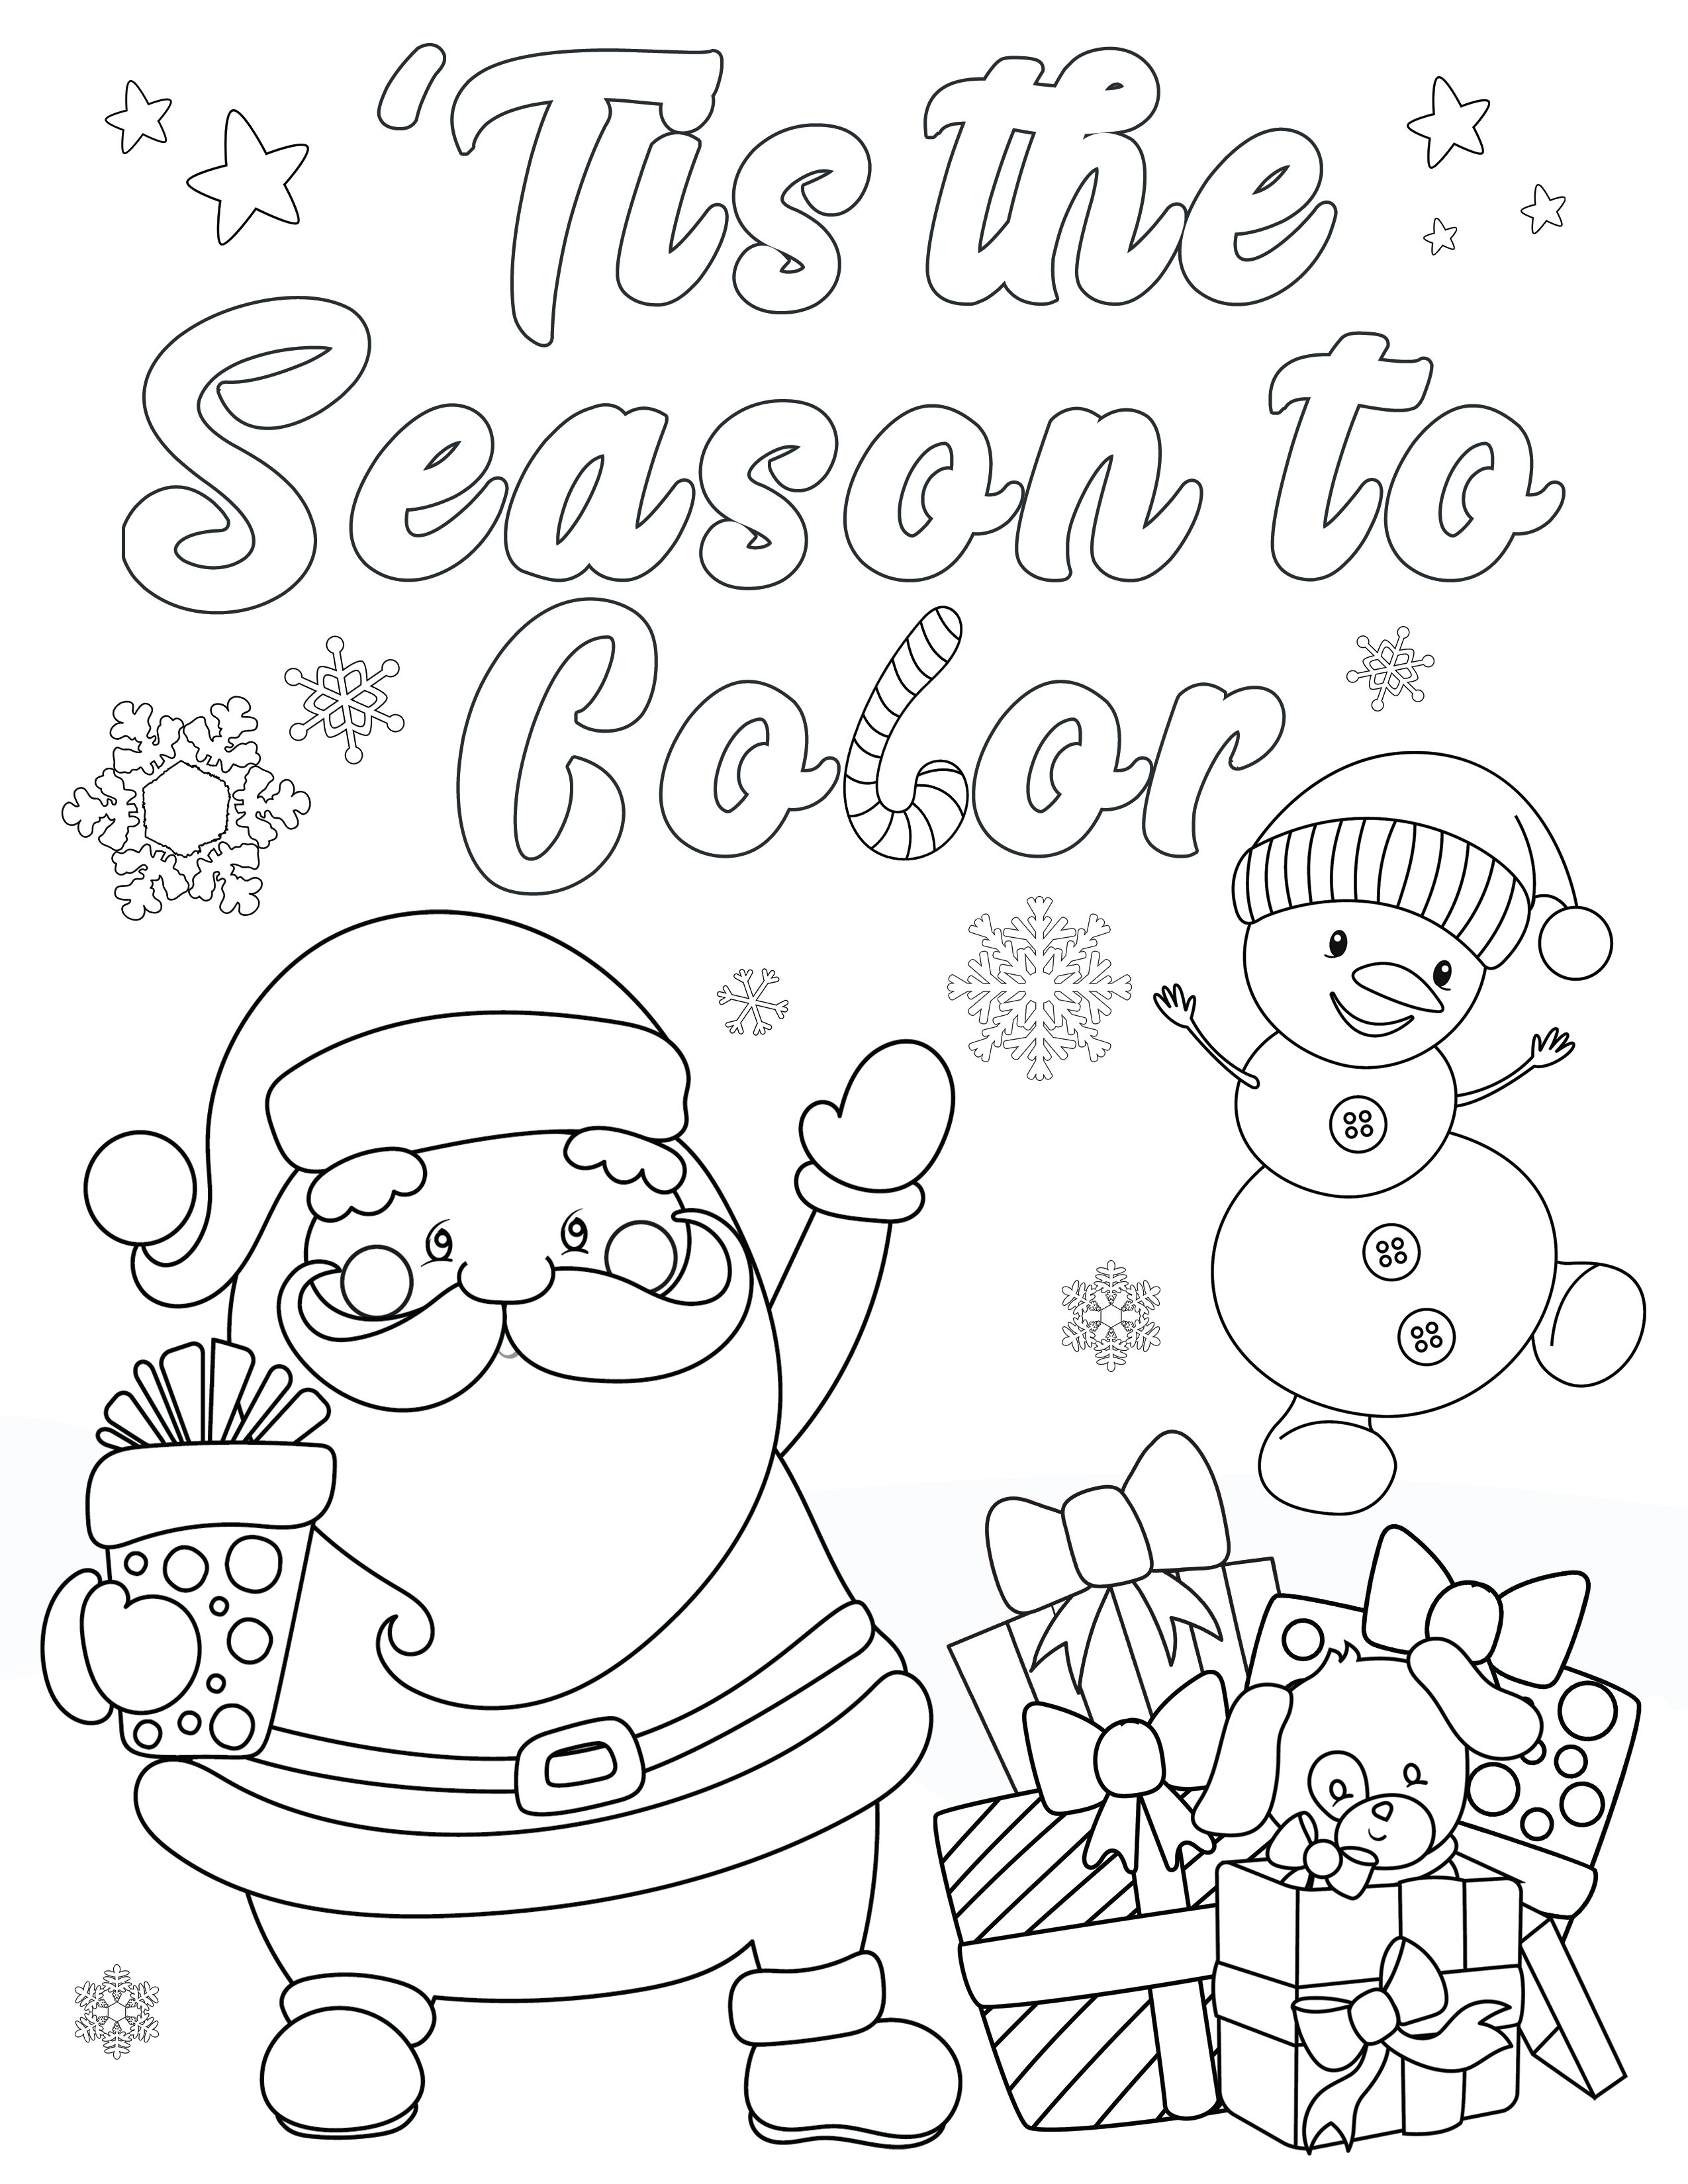 Best christmas coloring pages you can print - Literacy Worksheets